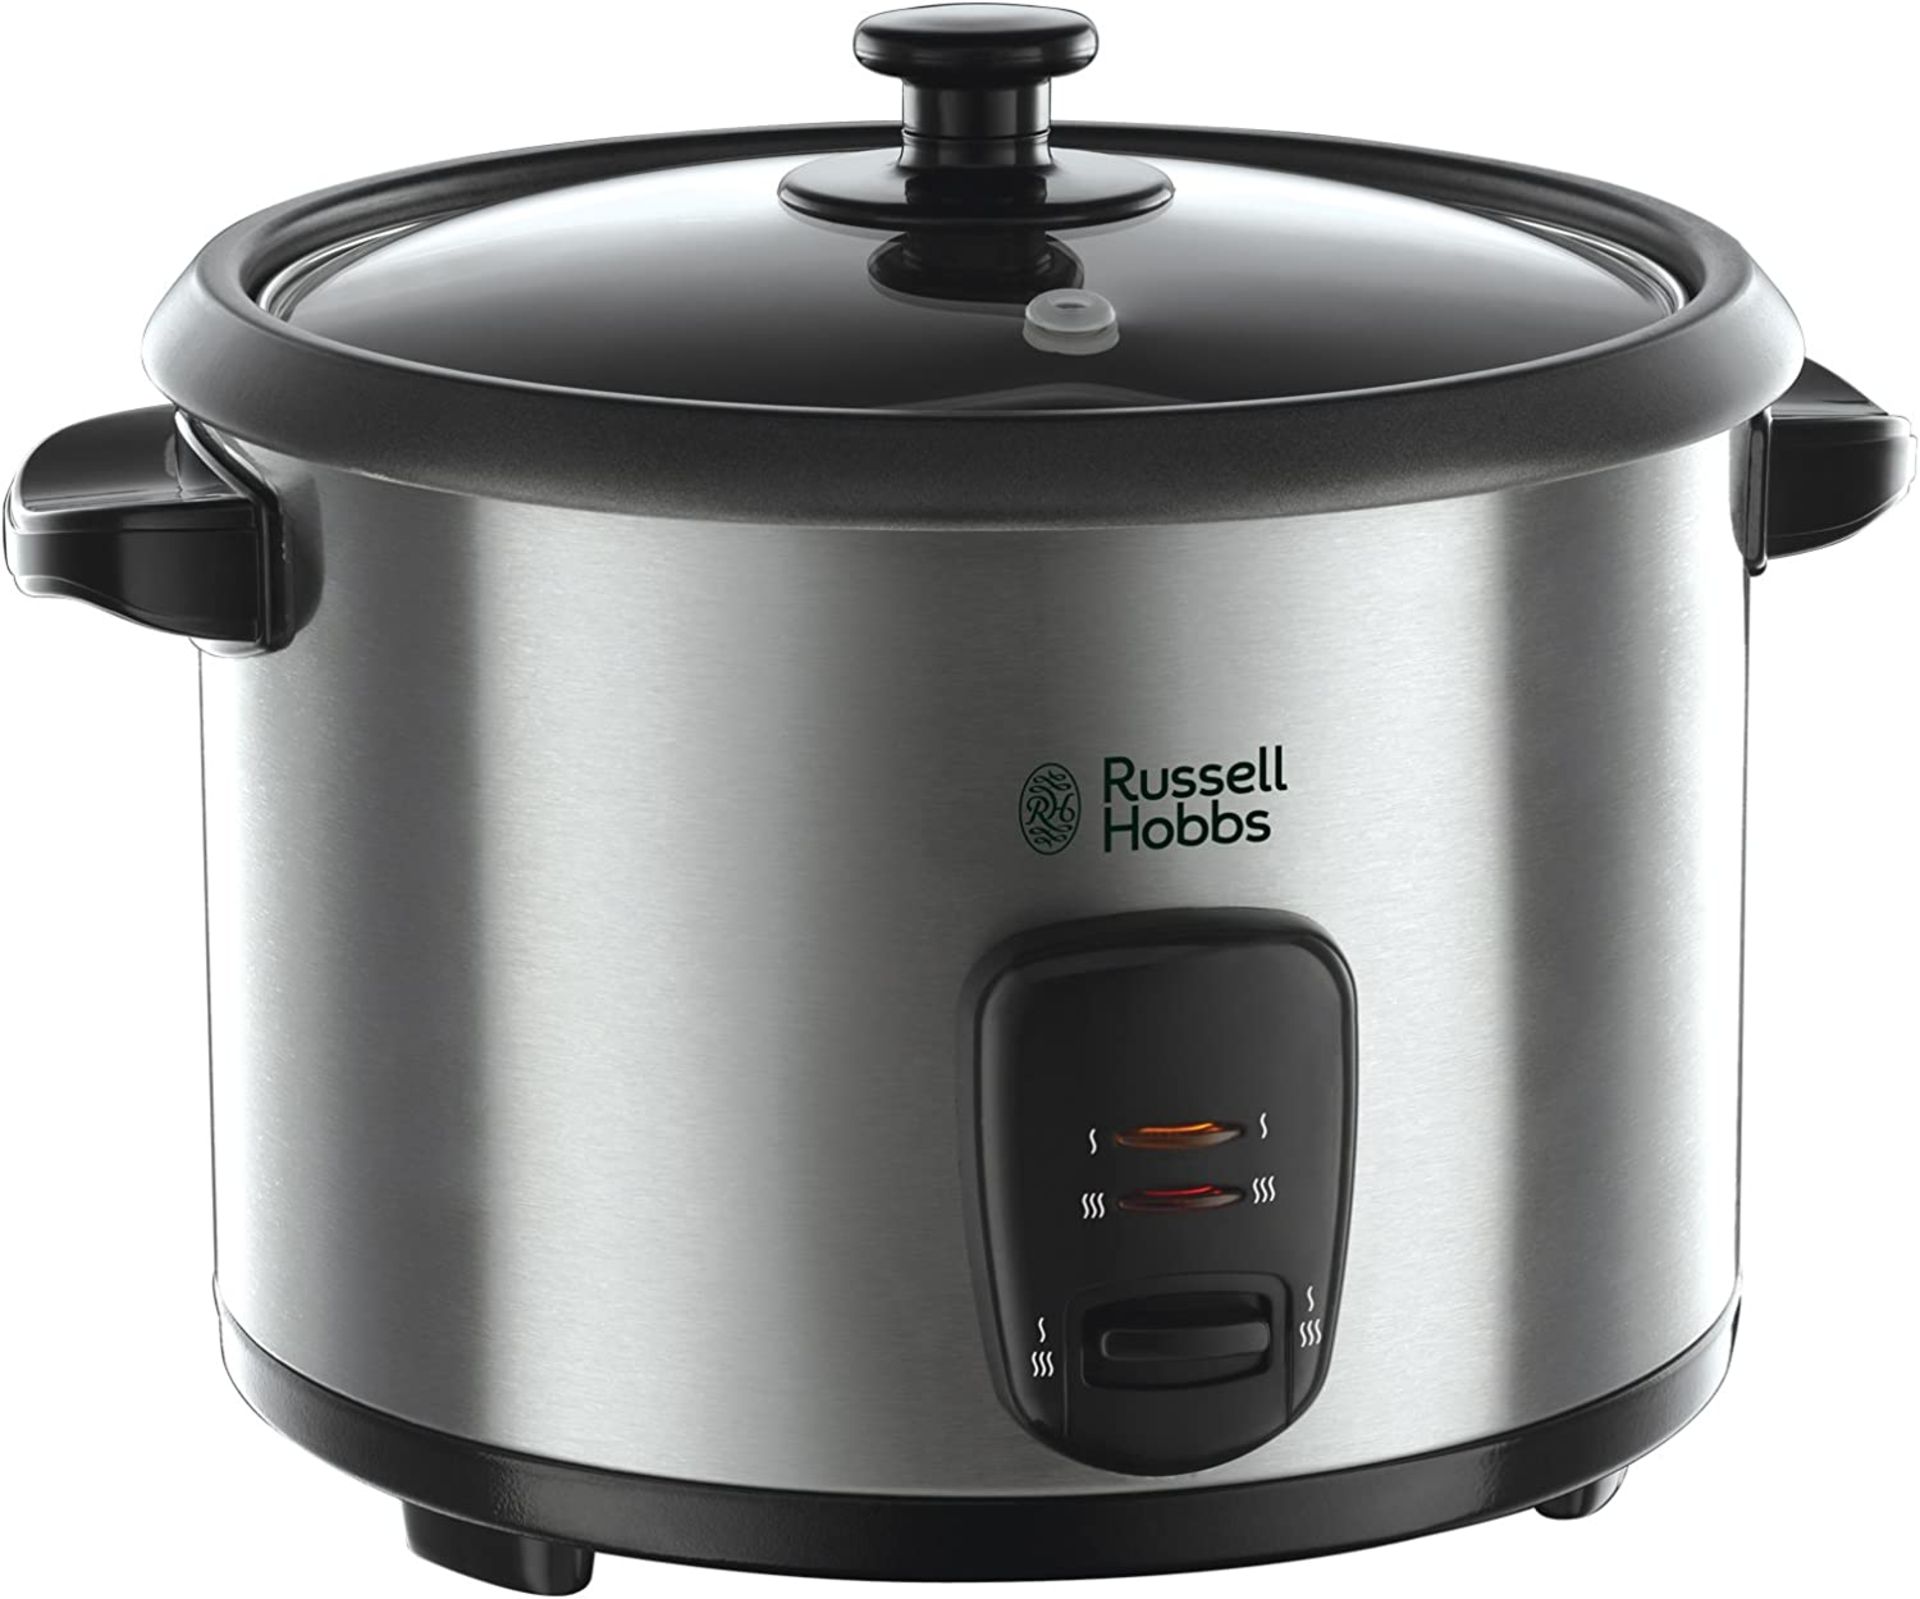 Russell Hobbs 19750 Rice Cooker and Steamer, 1.8L, Silver. RRP £29.99 - GRADE U